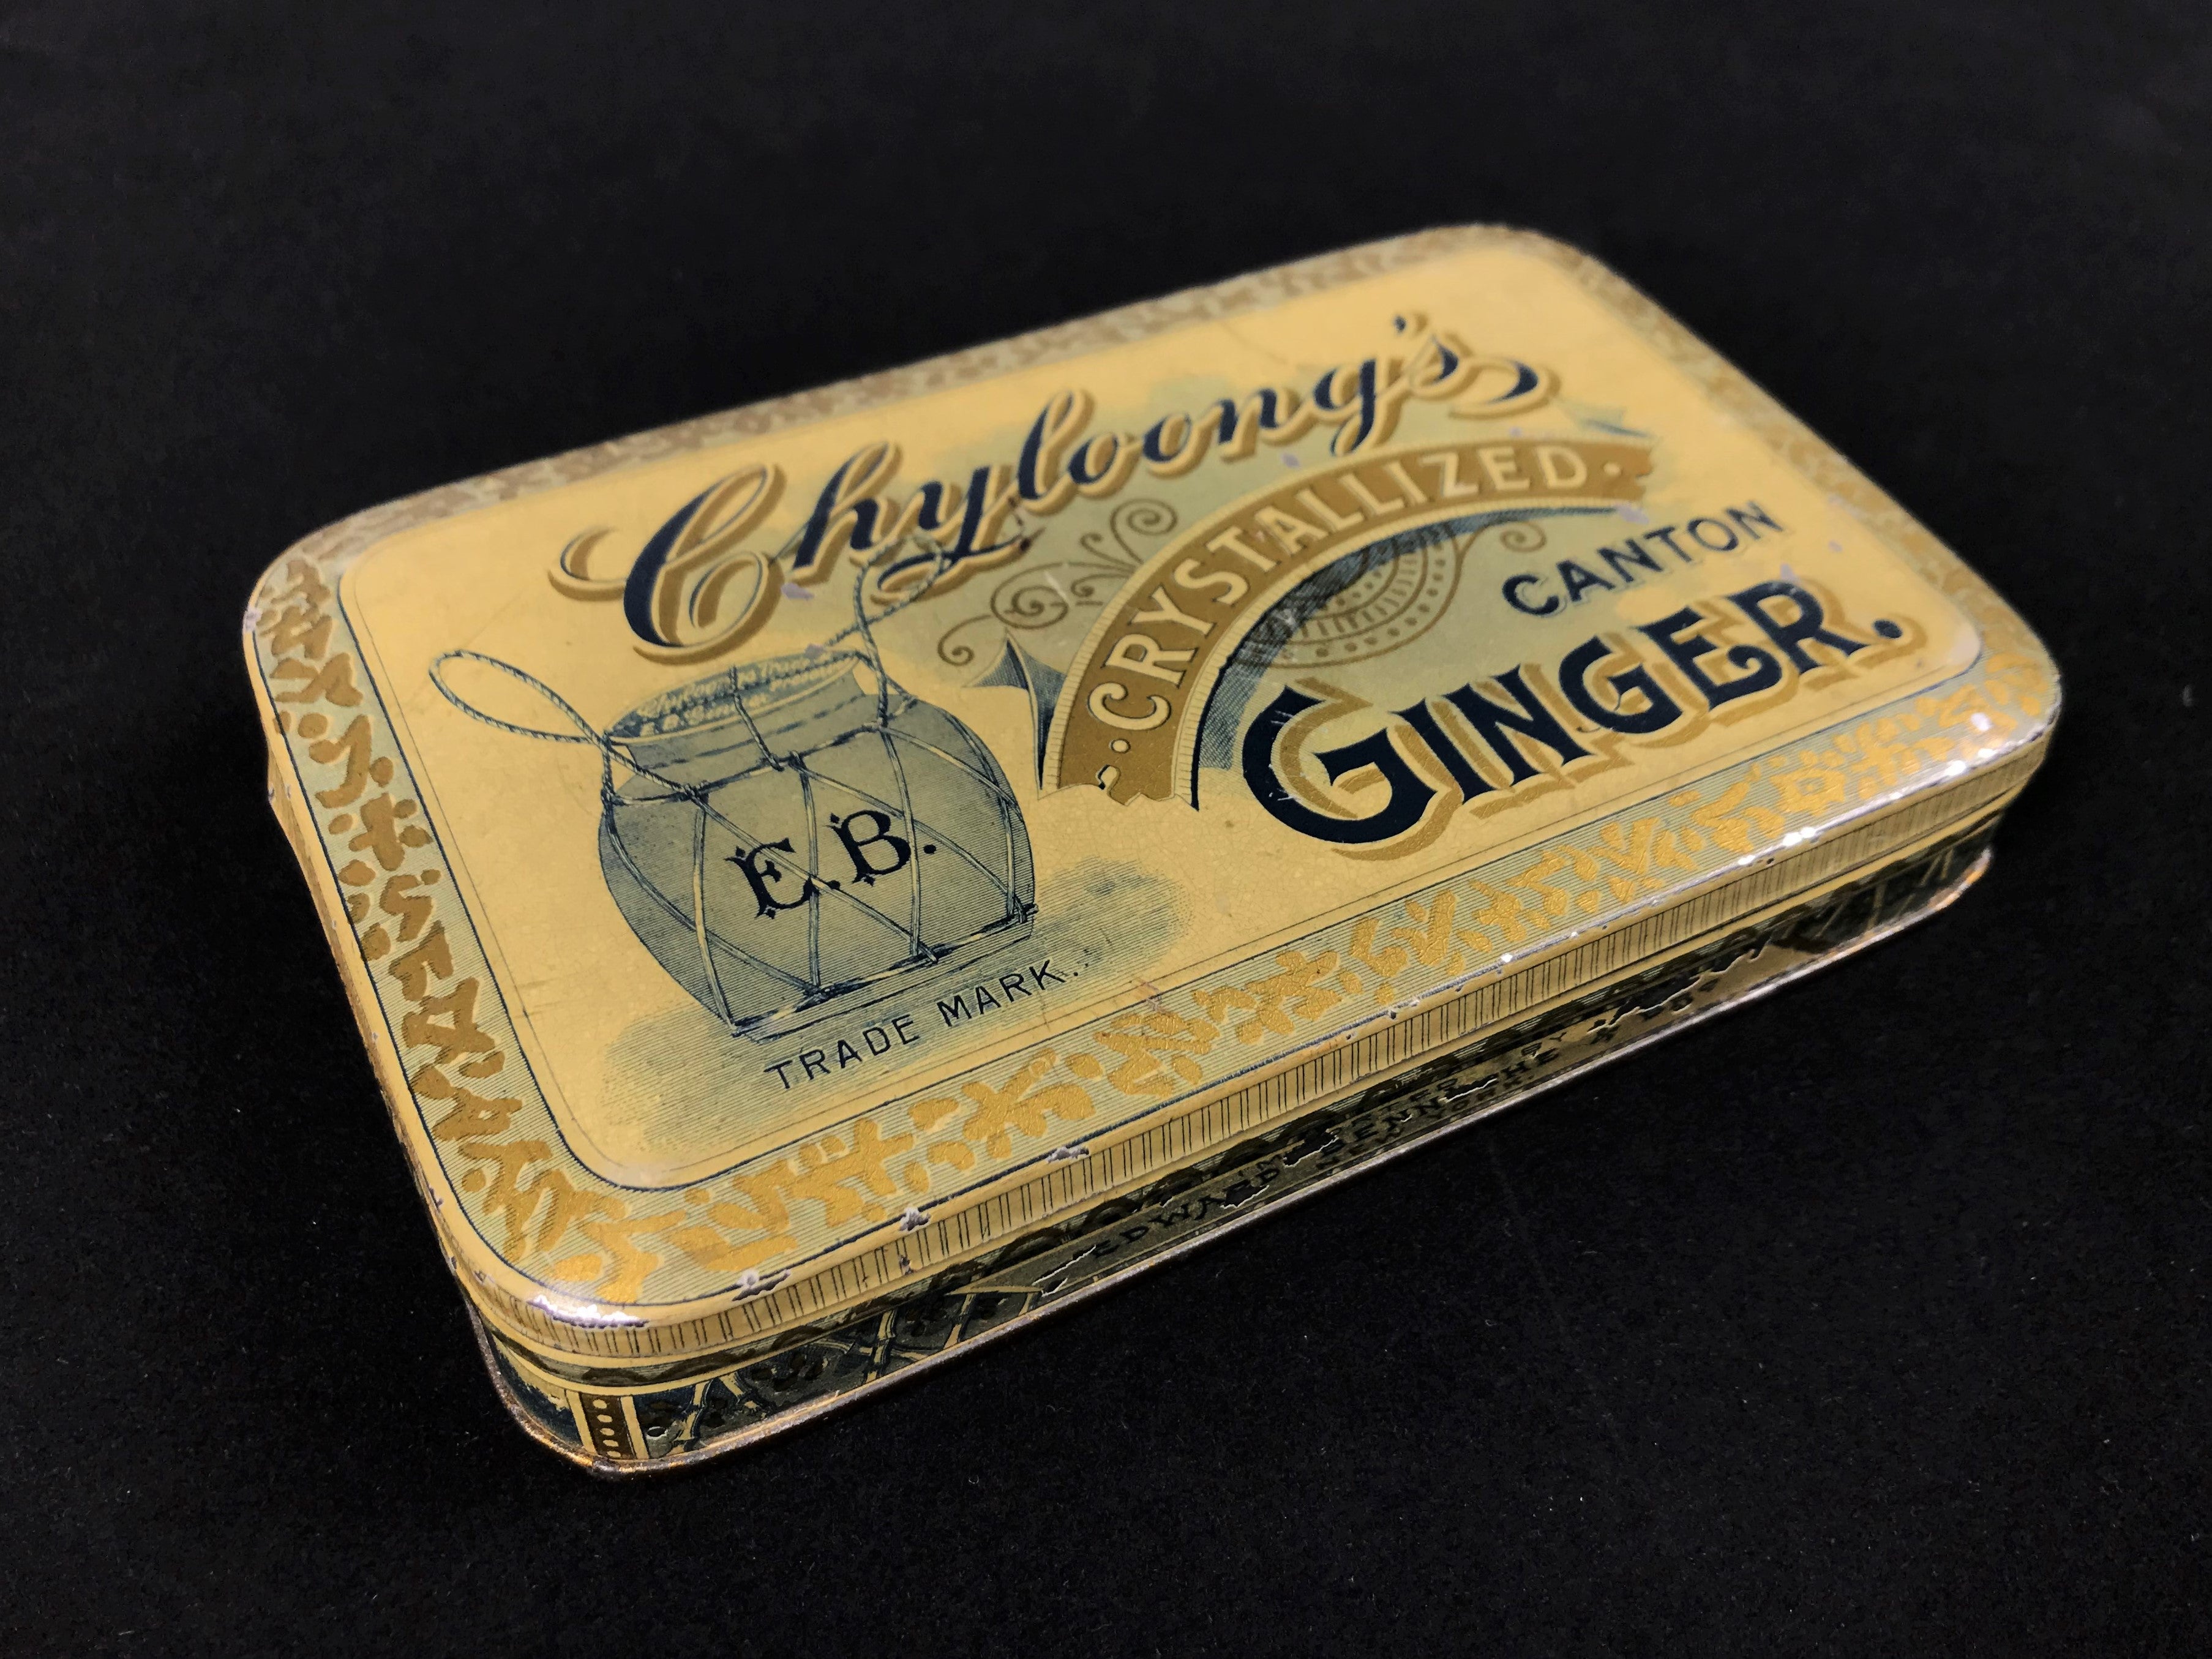 Vintage Chyloong's Crystallized Canton Ginger Tin